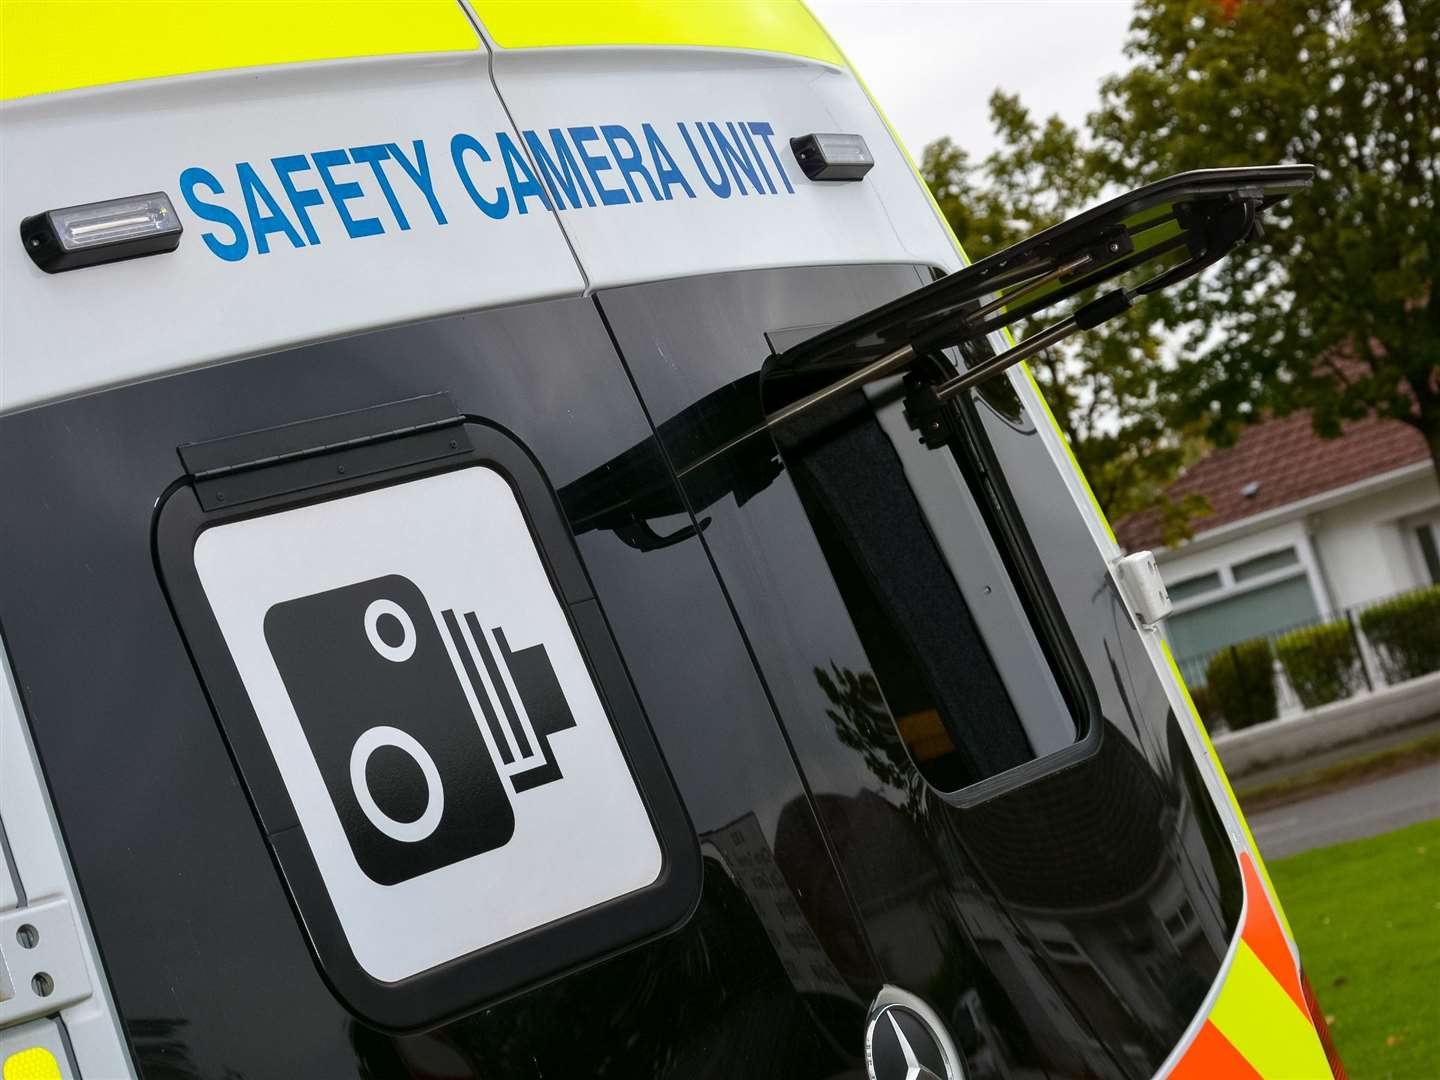 Two safety camera units are set to be introduced as part of a series of seasonal short term deployments.